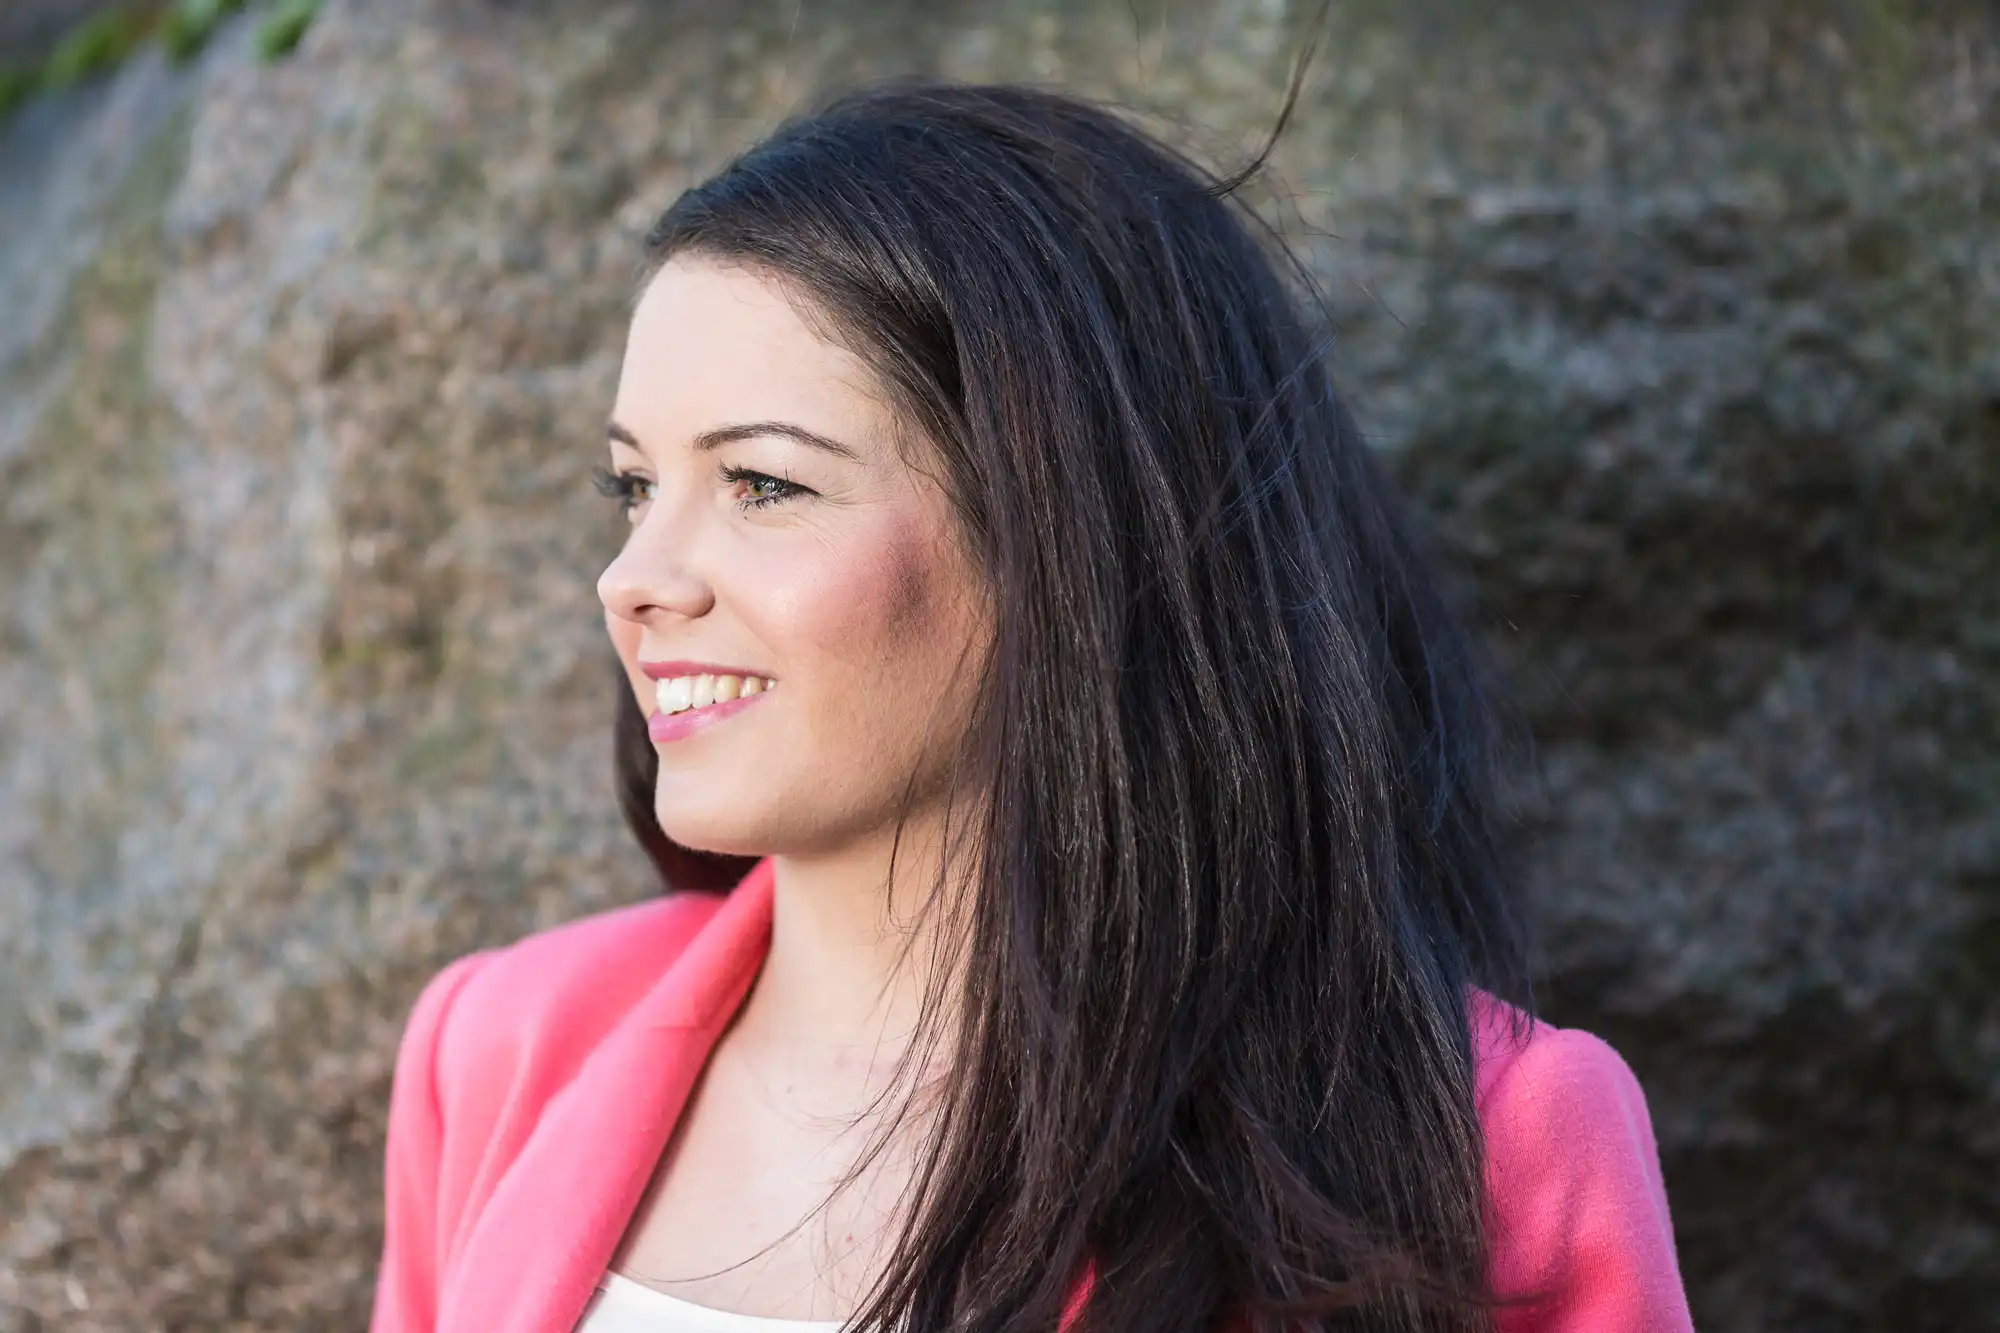 A woman with dark hair wearing a pink blazer smiles while looking to the side, with a large rock in the background.